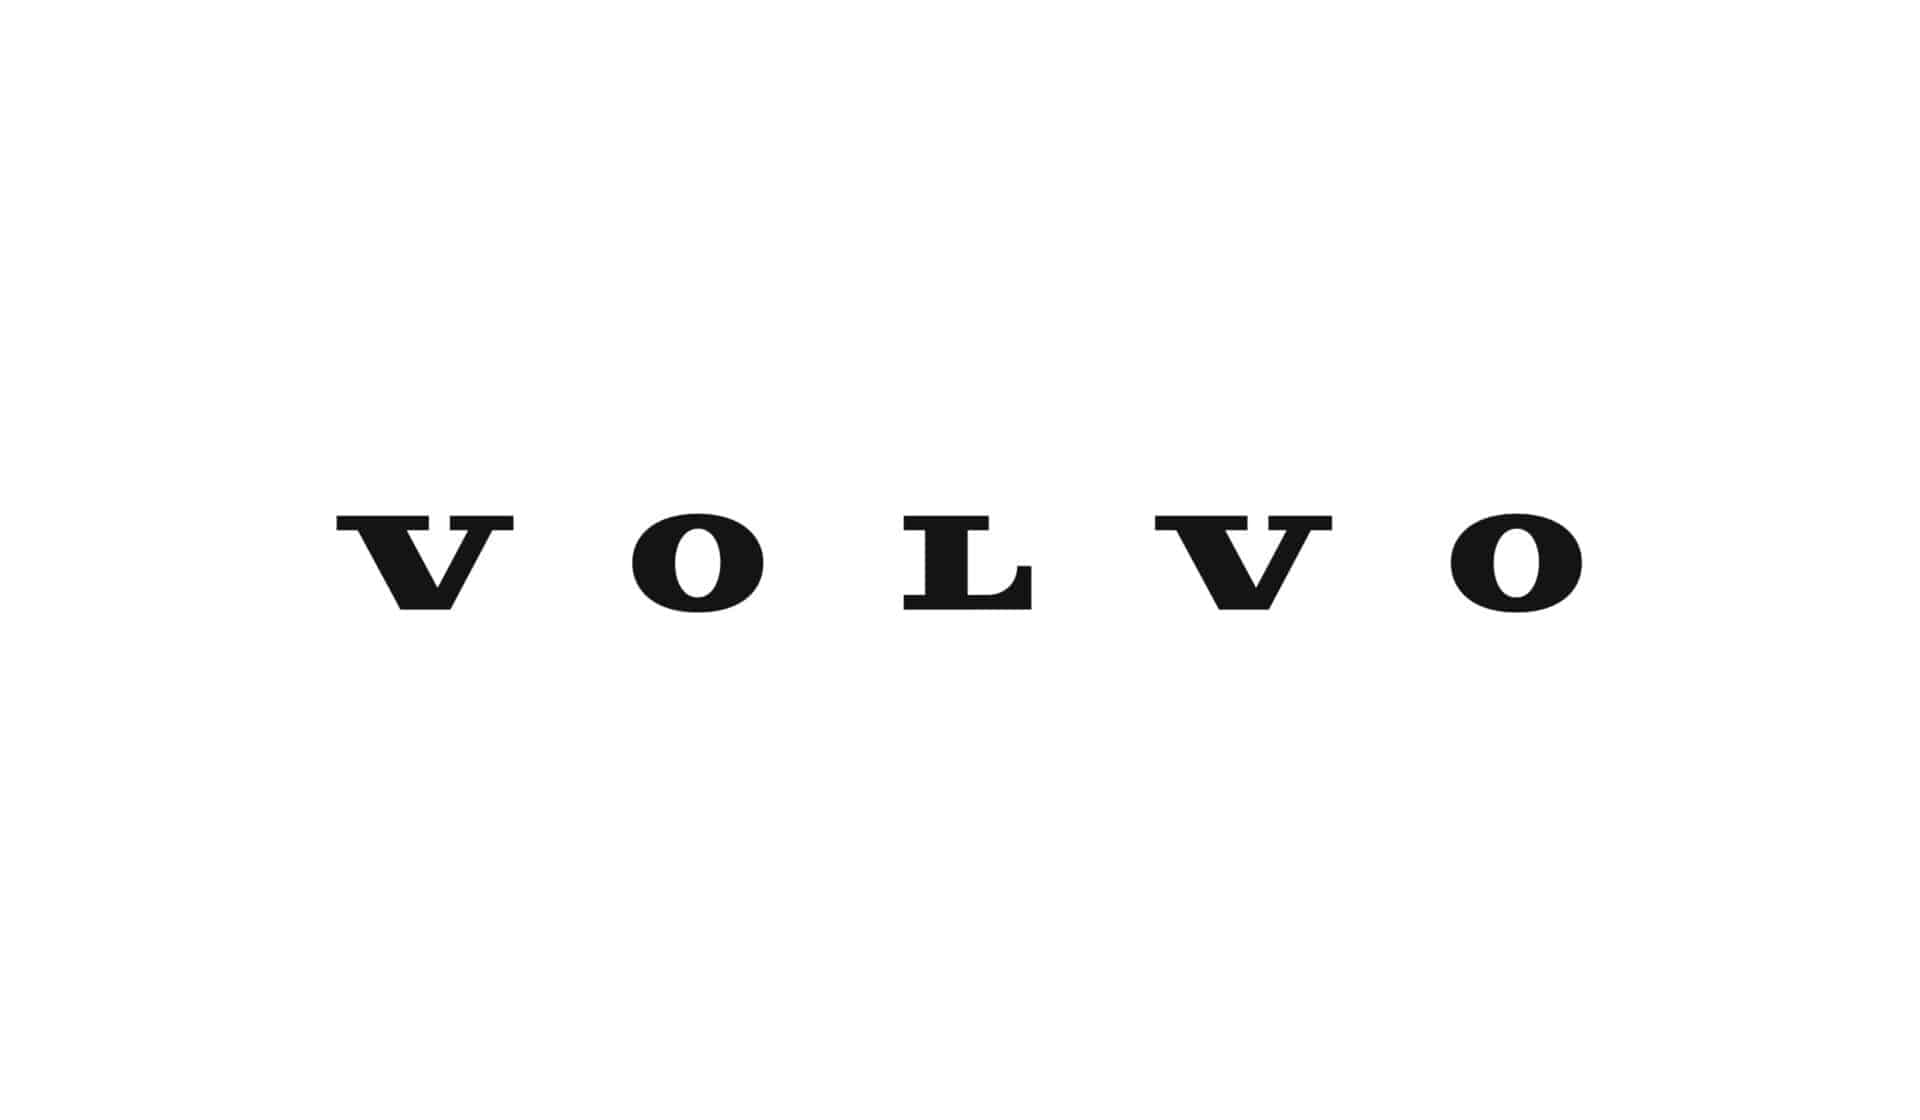 Volvo logo with black text